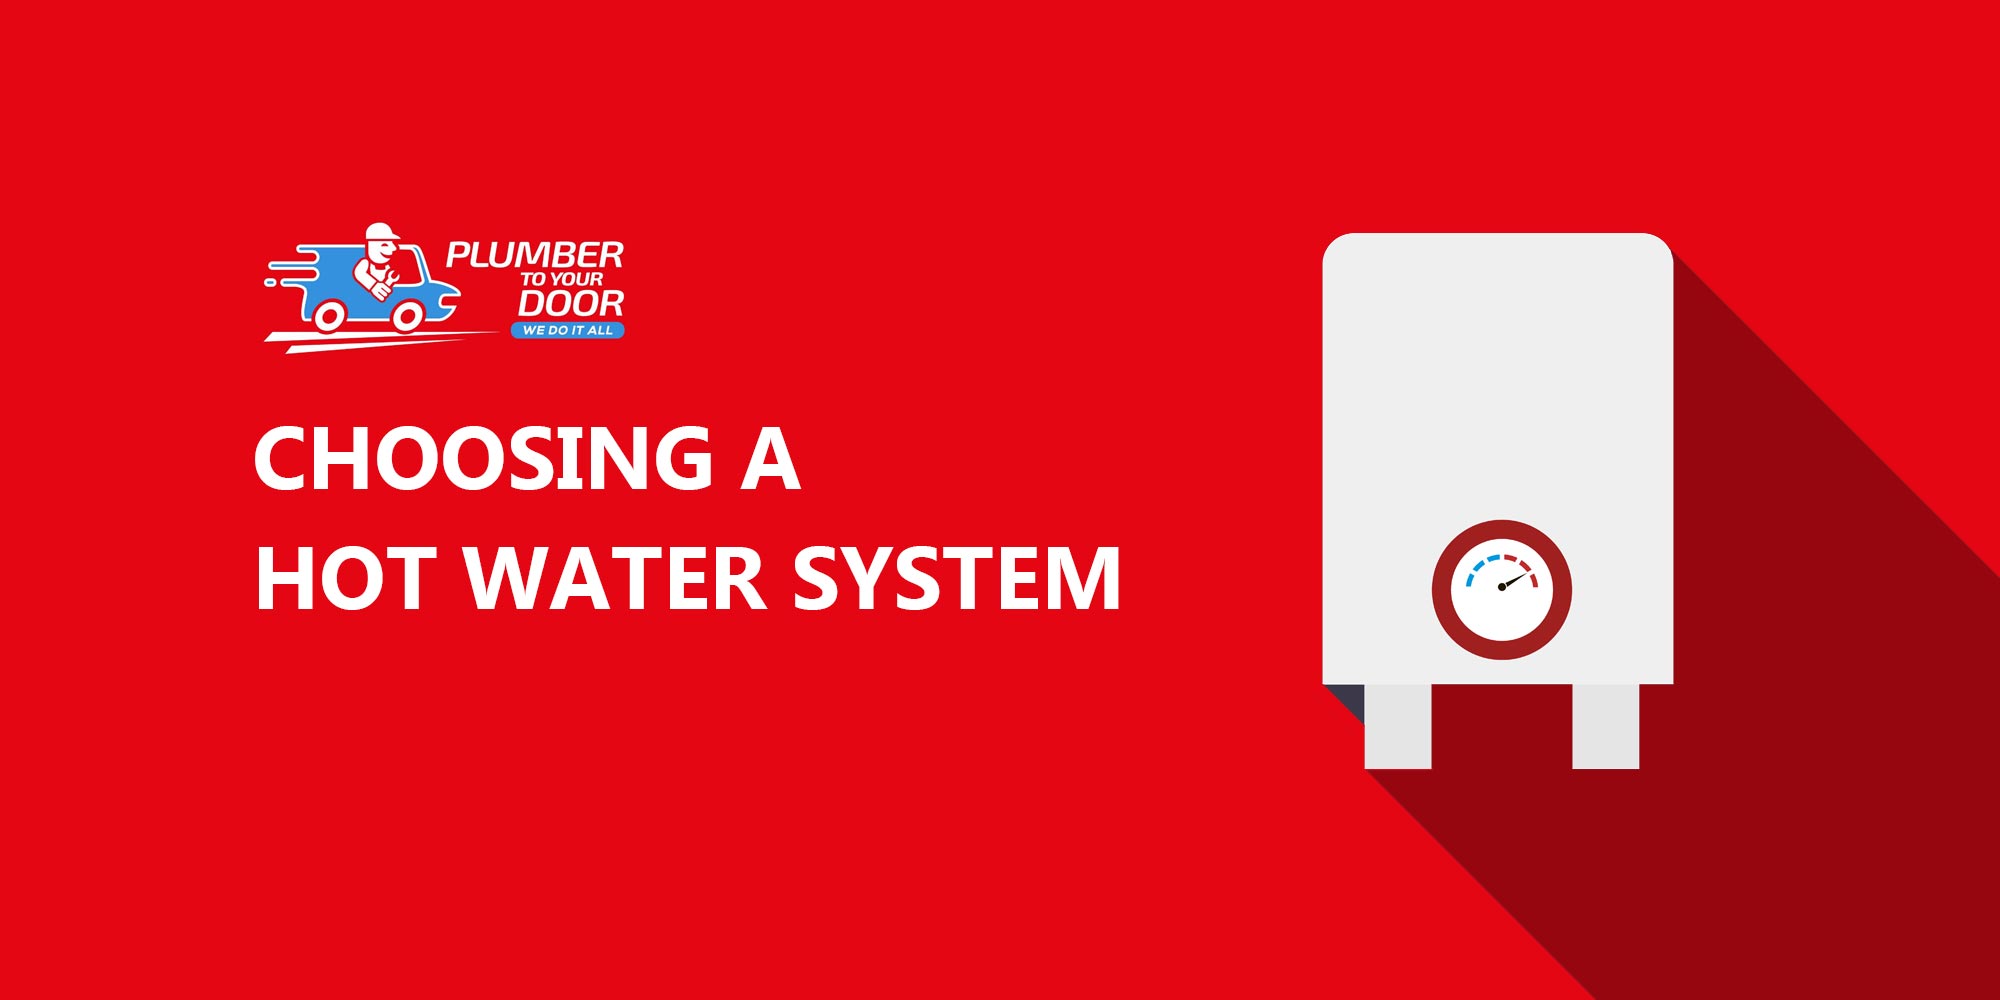 Choosing the right Hot Water System for you